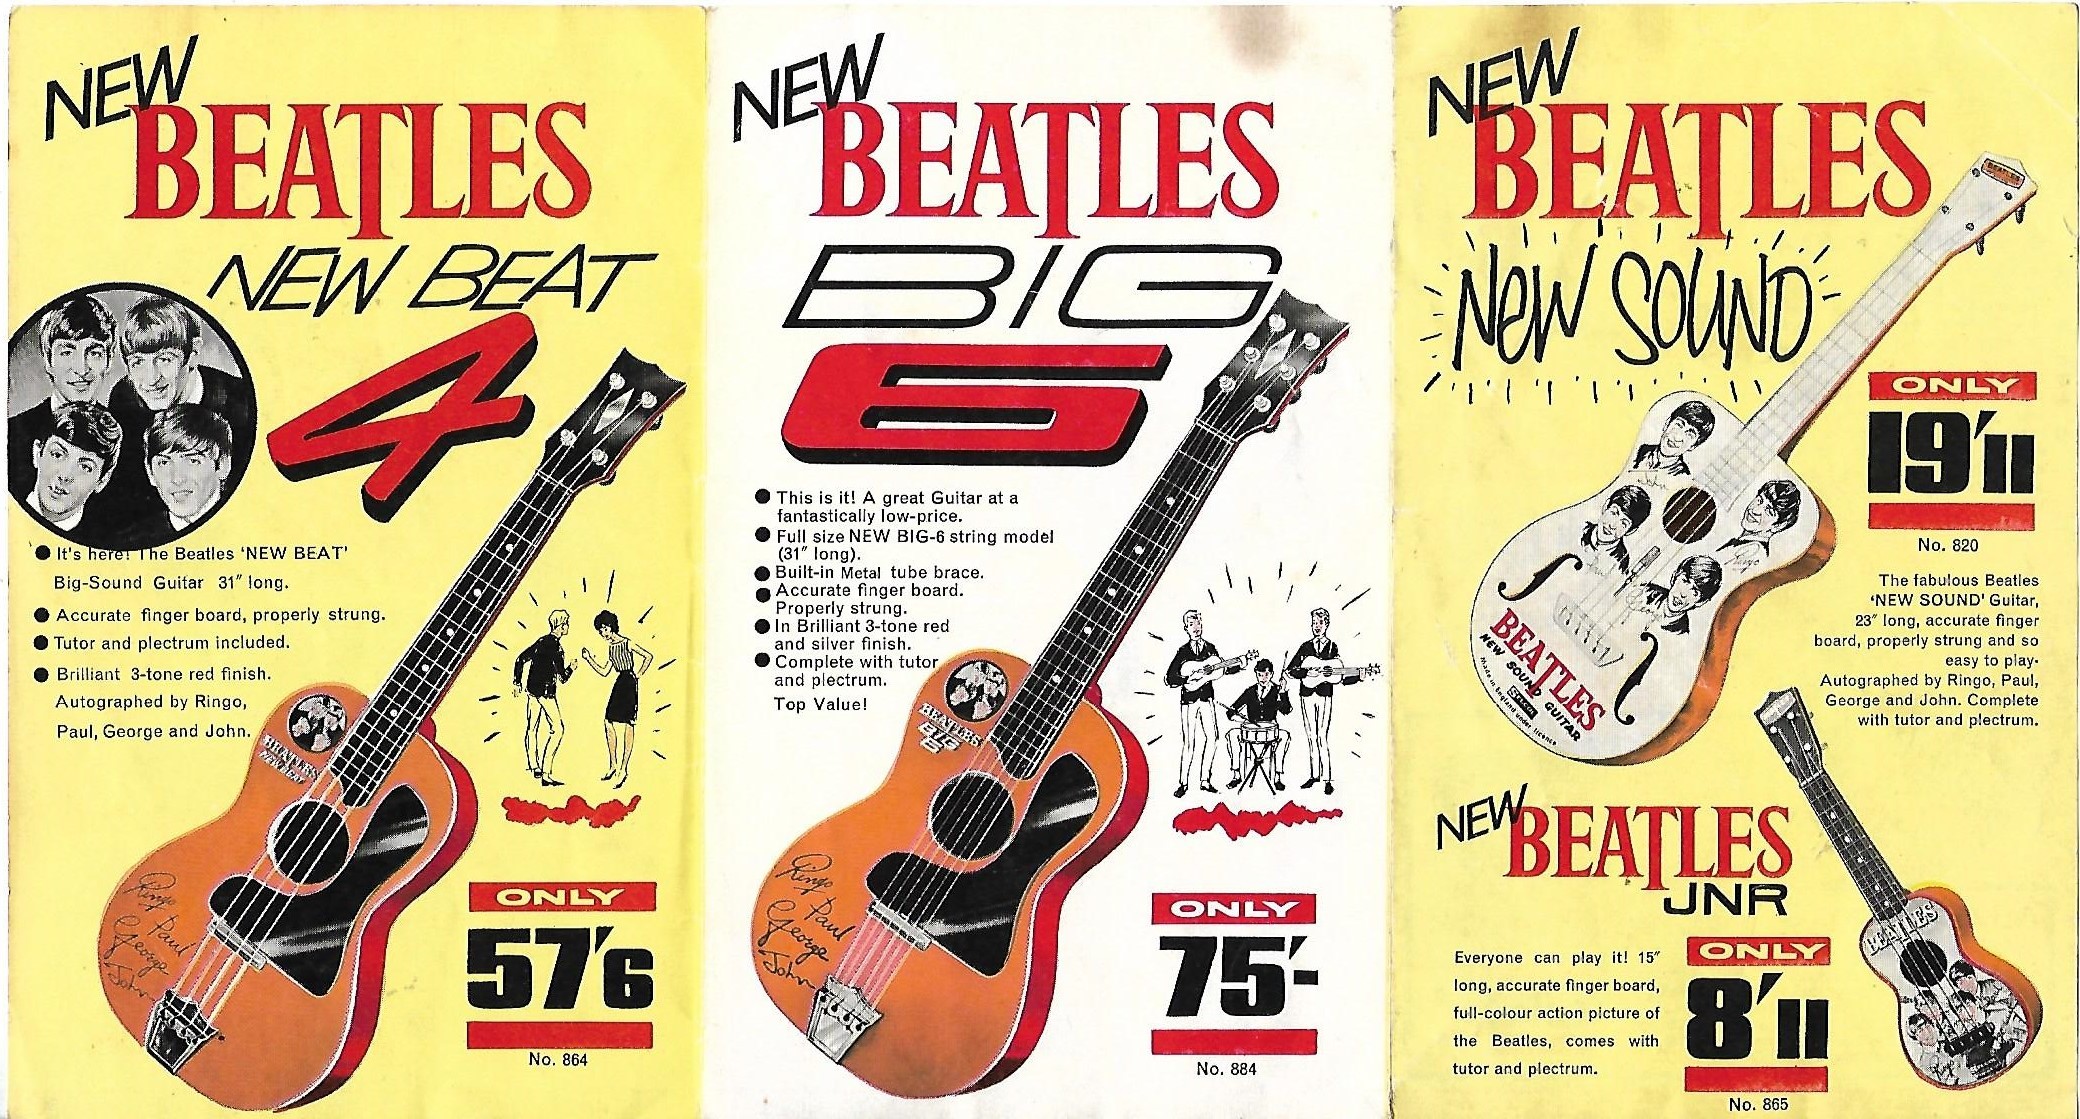 The Beatles Selcol instruments sales tri-fold booklet 1963 UK - Image 2 of 2